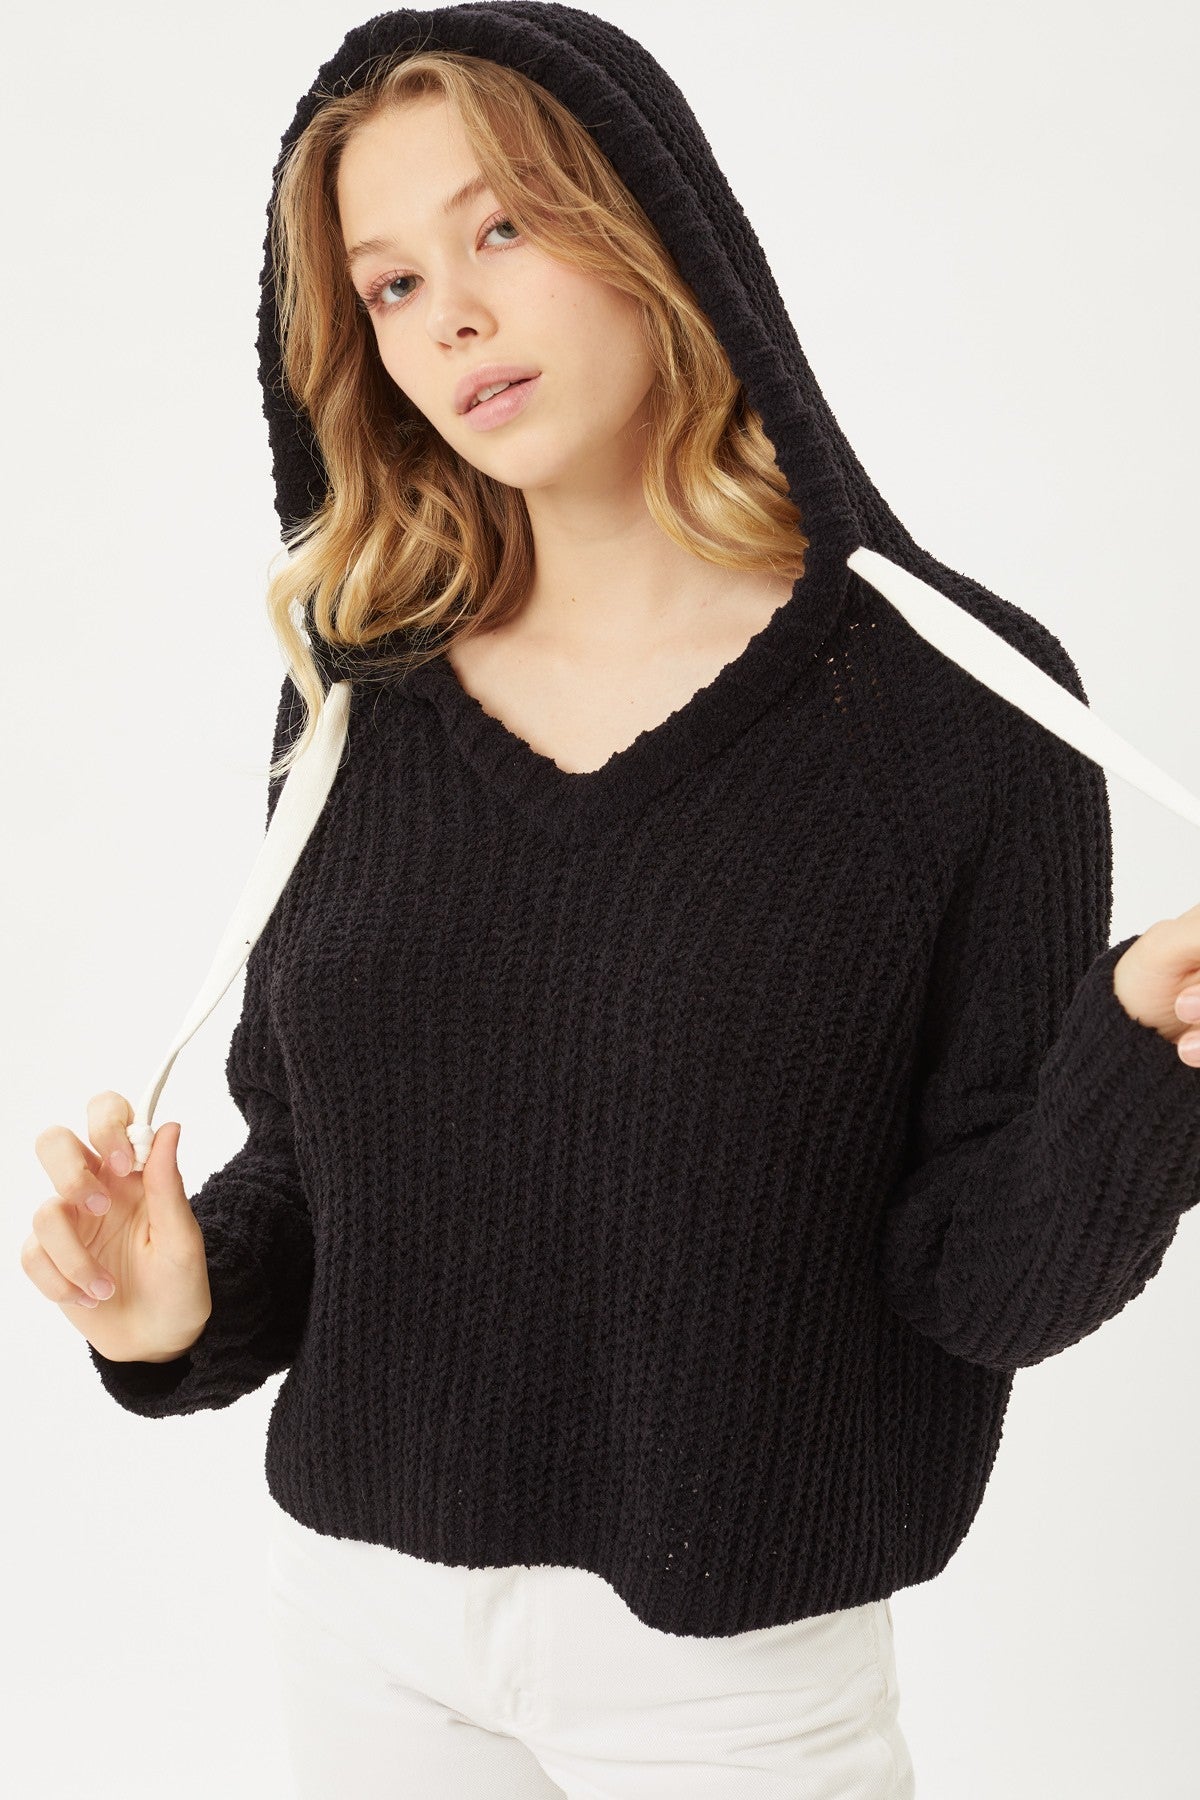 Pullover Hoodie Sweater Top - Love It Clothing